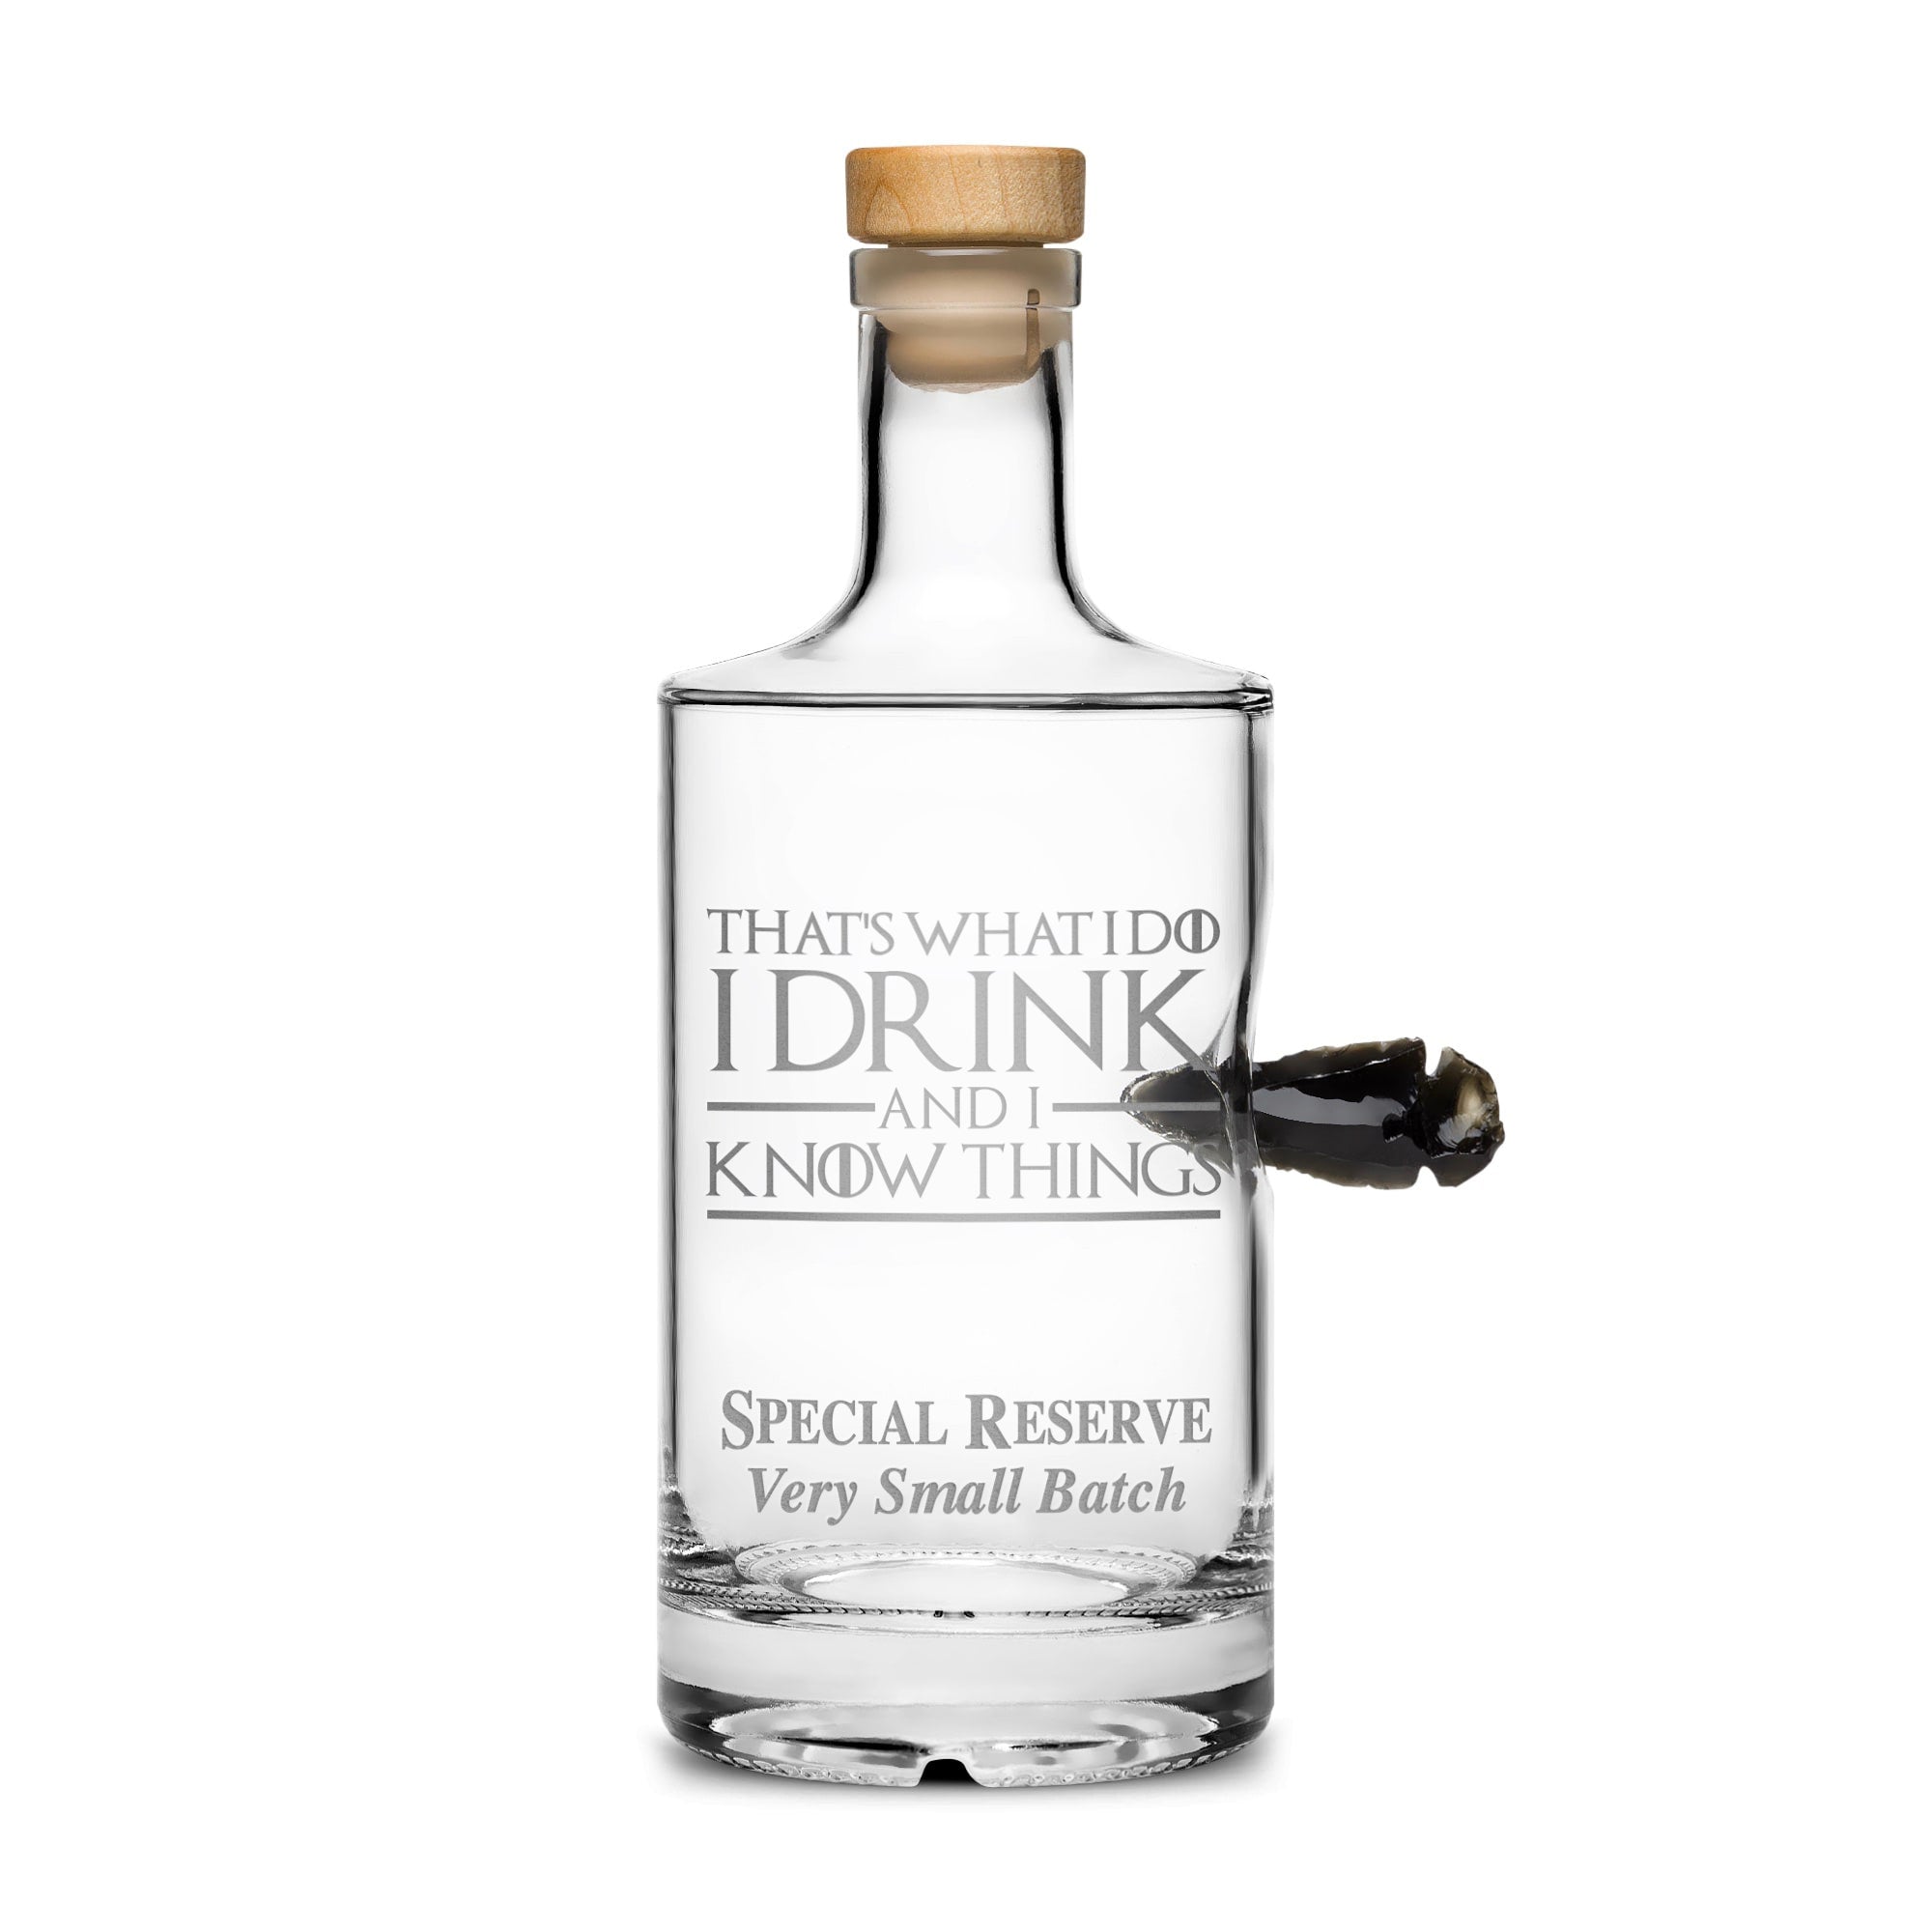 Premium Refillable Jersey Bottle, Game of Thrones, Obsidian Dragon Glass Arrowhead, I Drink and I Know Things, 750mL